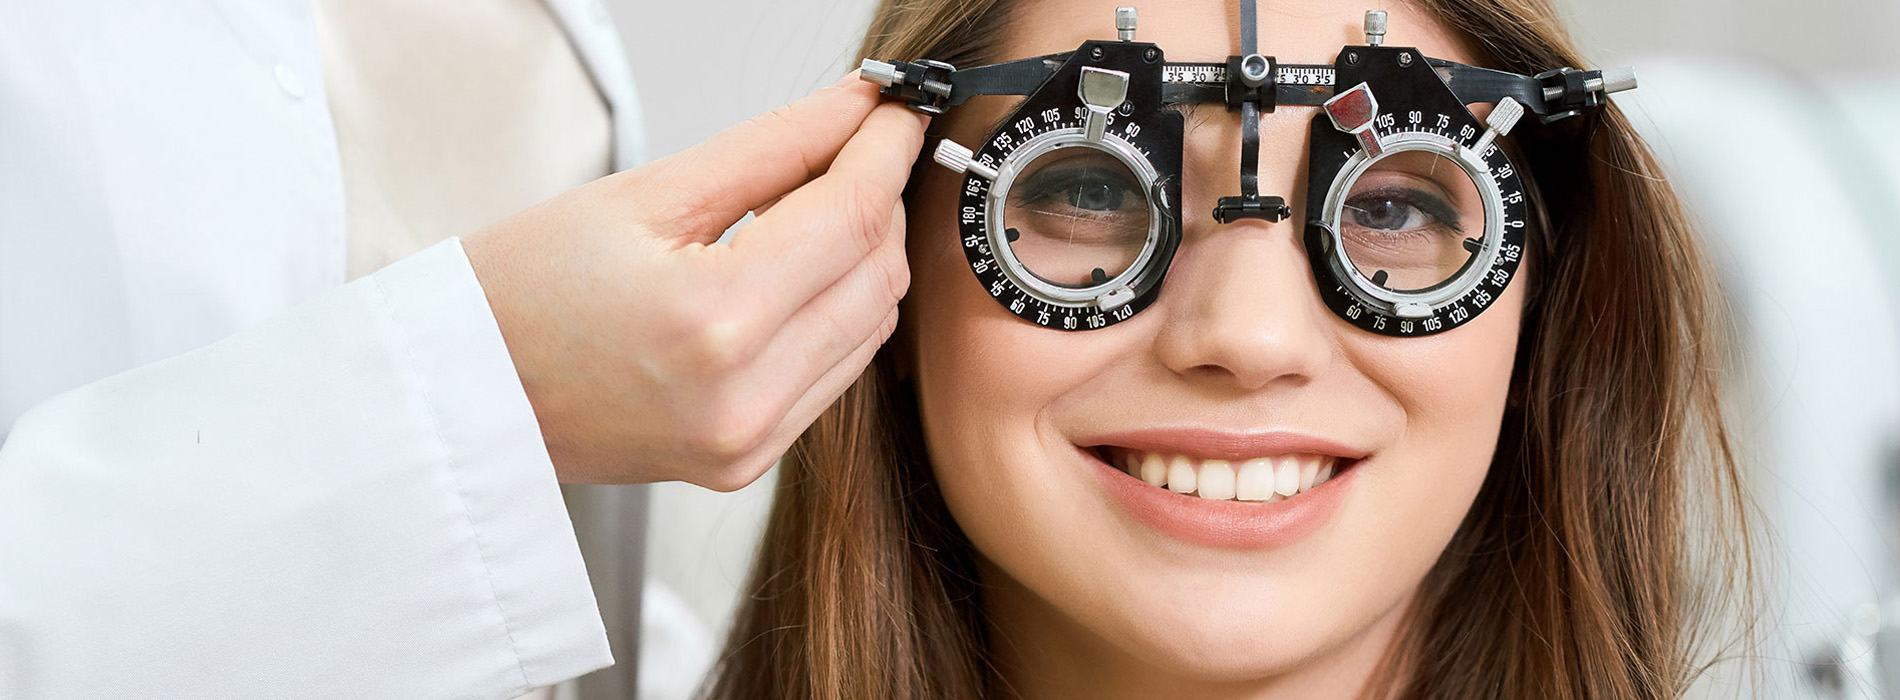 Professional Optometry Vision Care | Emergency Eye Care, Glaucoma Management and Pediatric Eye Care